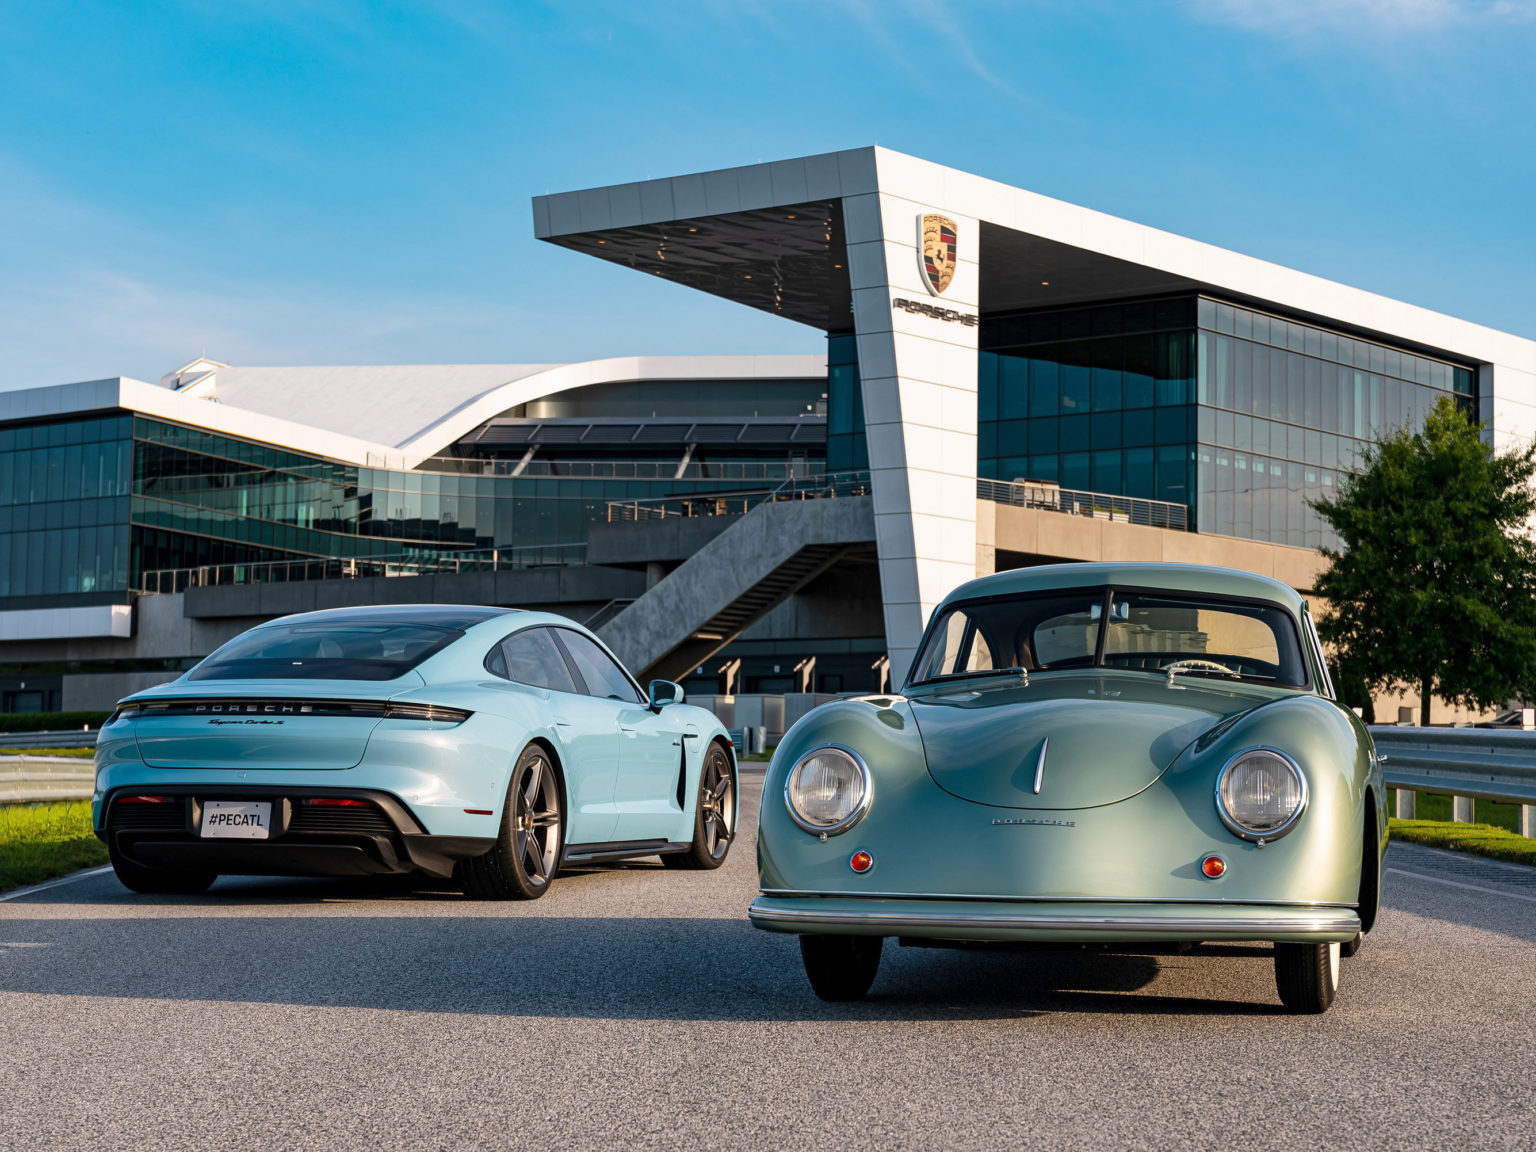 Porsche is celebrating its 70th anniversary of selling vehicles stateside.